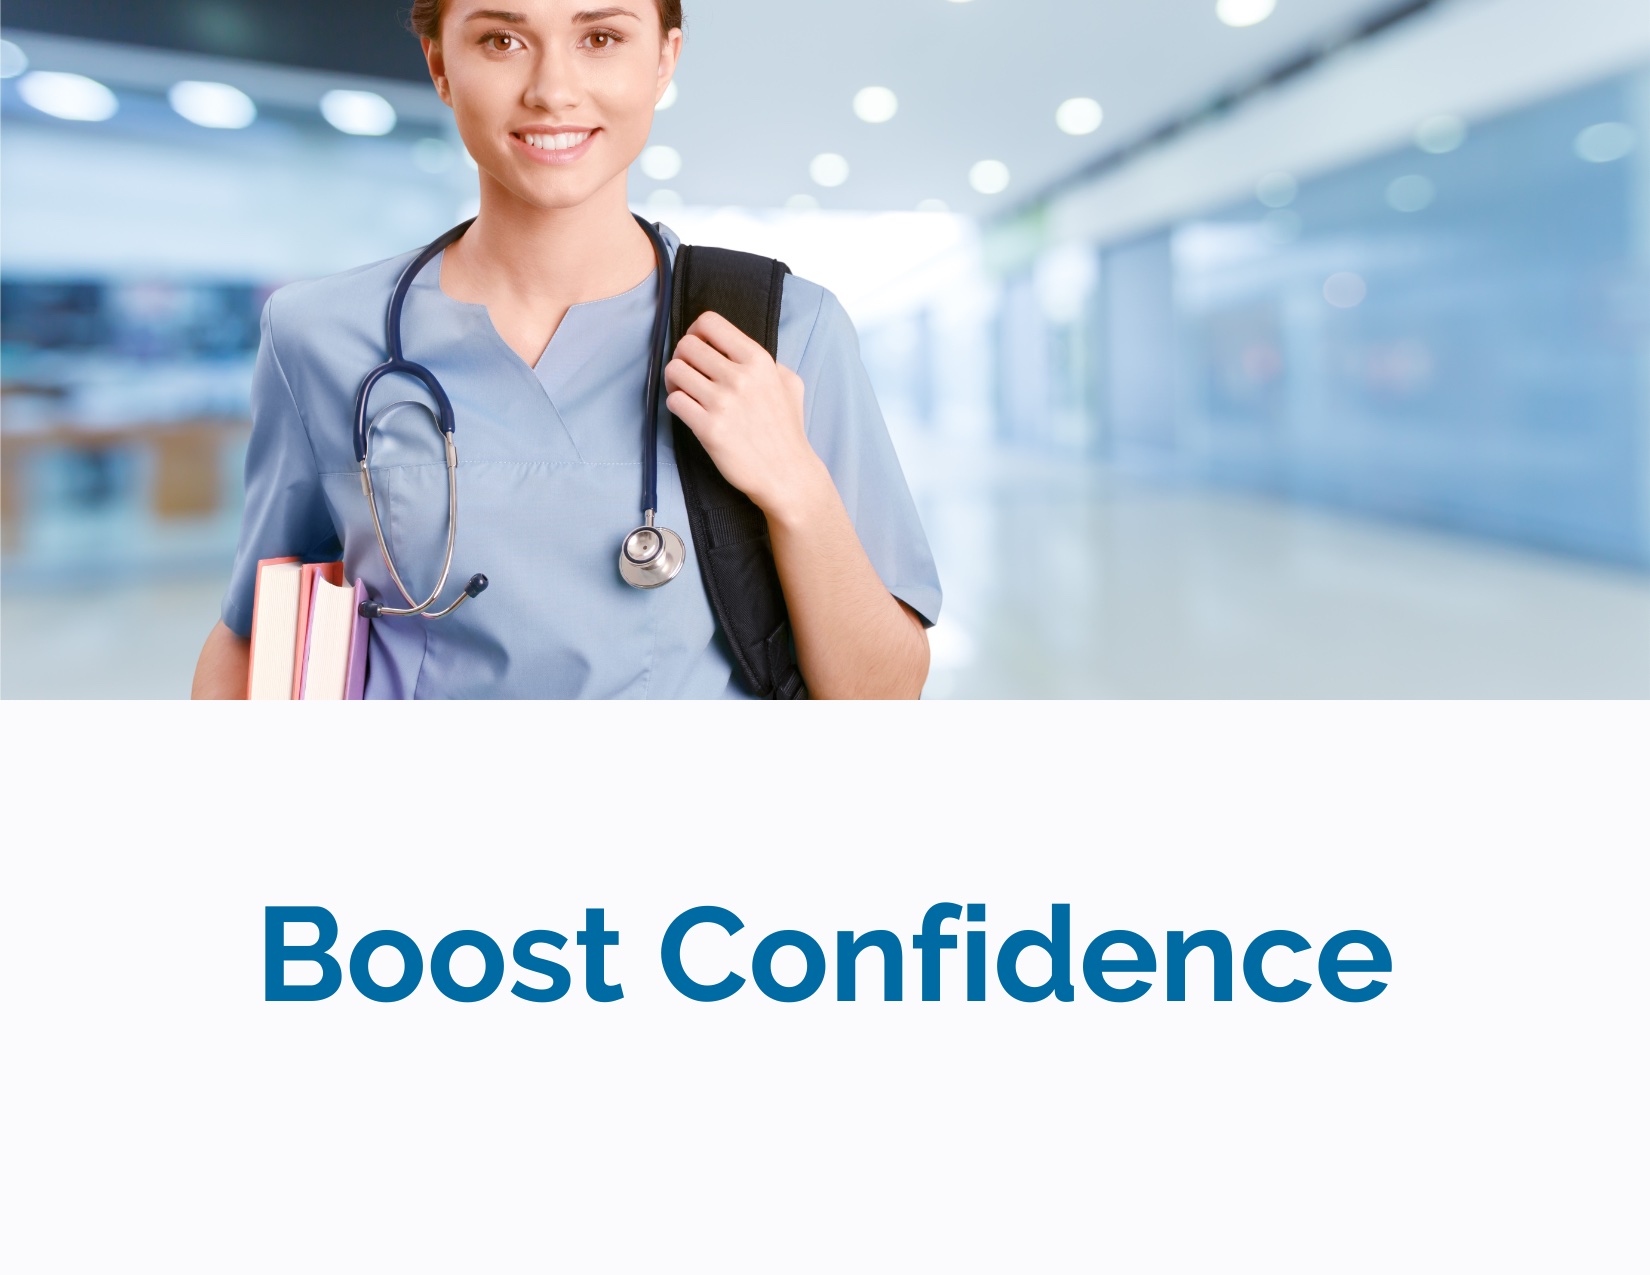 Boost Confidence Image Only